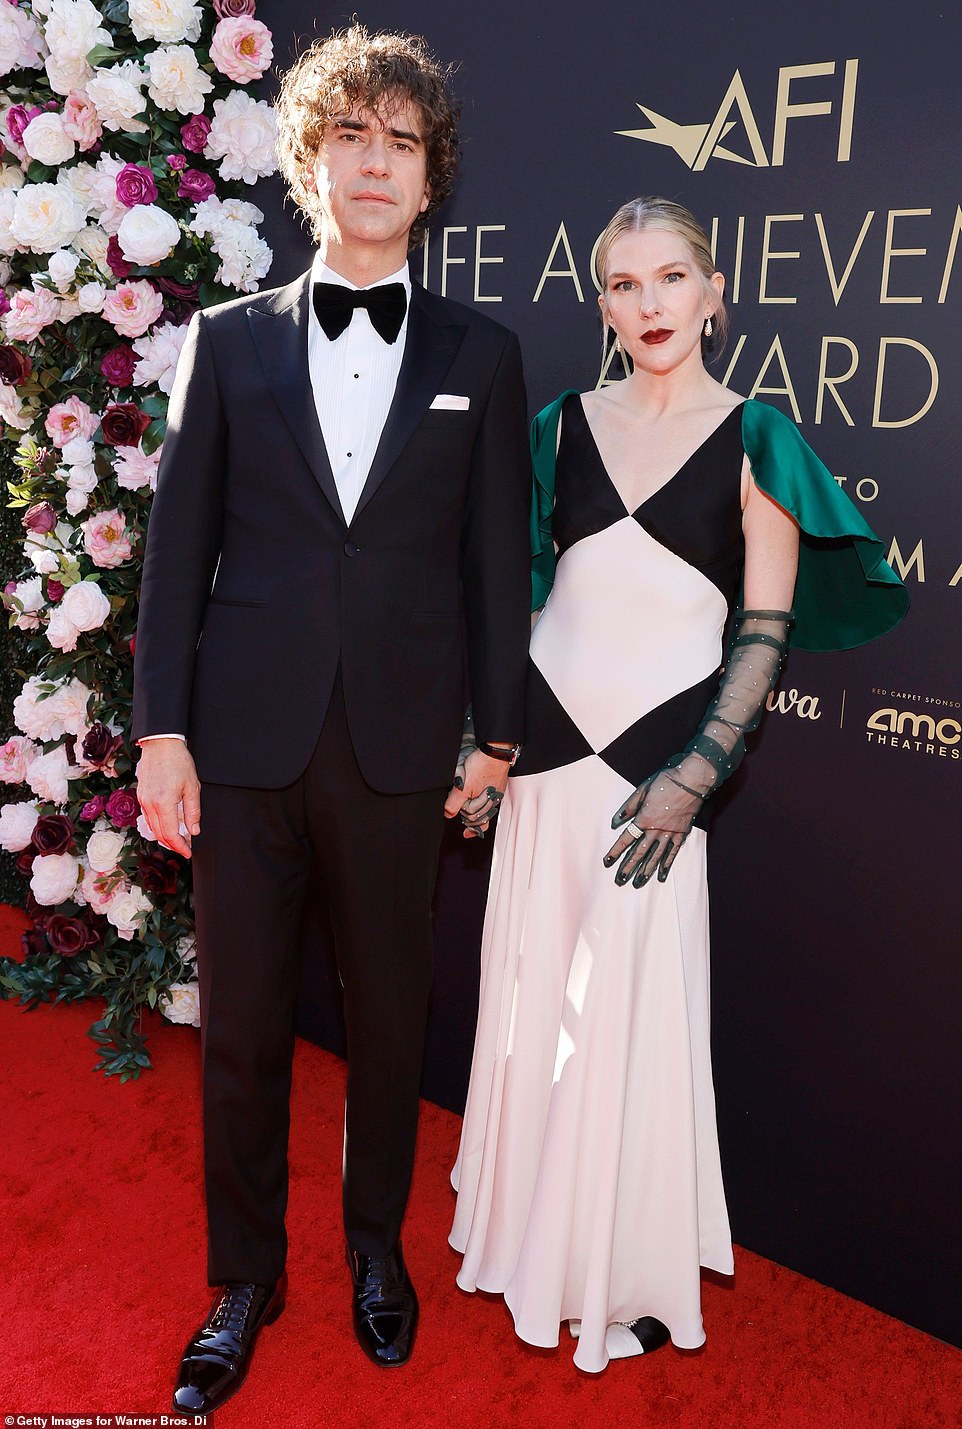 Lily Rabe channeled old glamour in a white ankle-length dress with black diamond cutouts and a short green satin cape as she arrived with husband Hamish Linklater